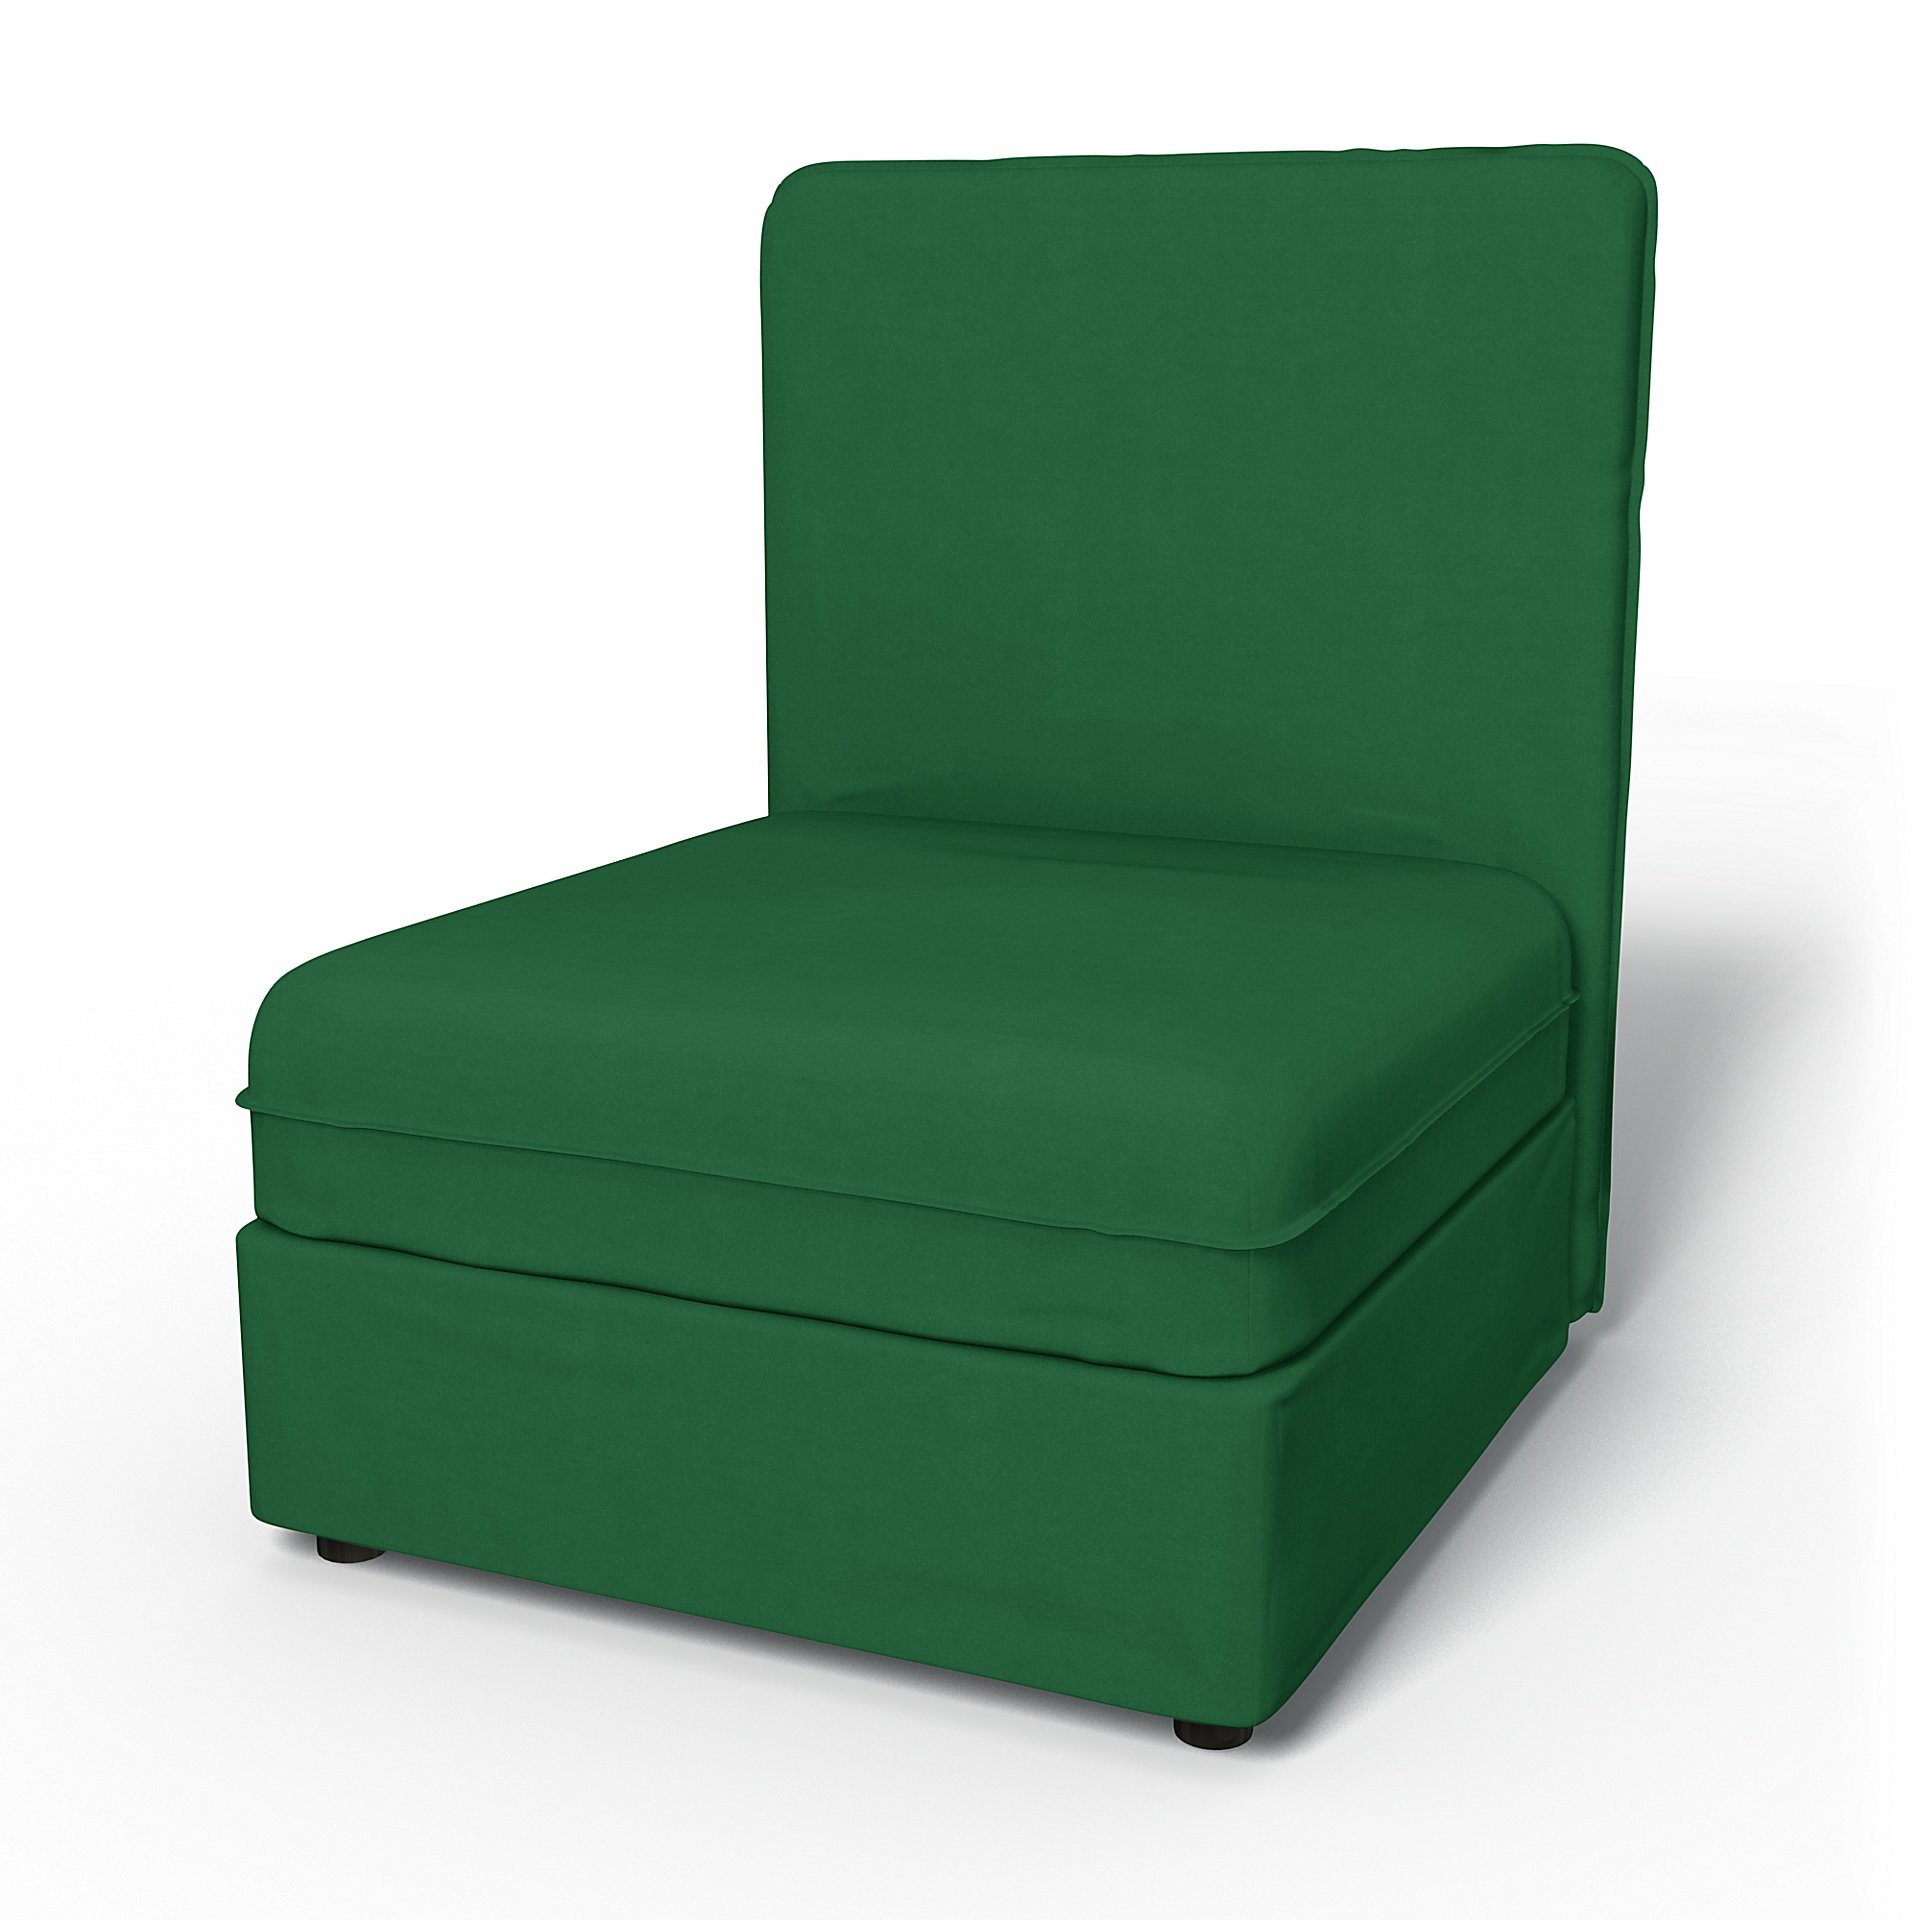 IKEA - Vallentuna Seat Module with High Back and Storage Cover 80x100cm 32x39in, Abundant Green, Vel